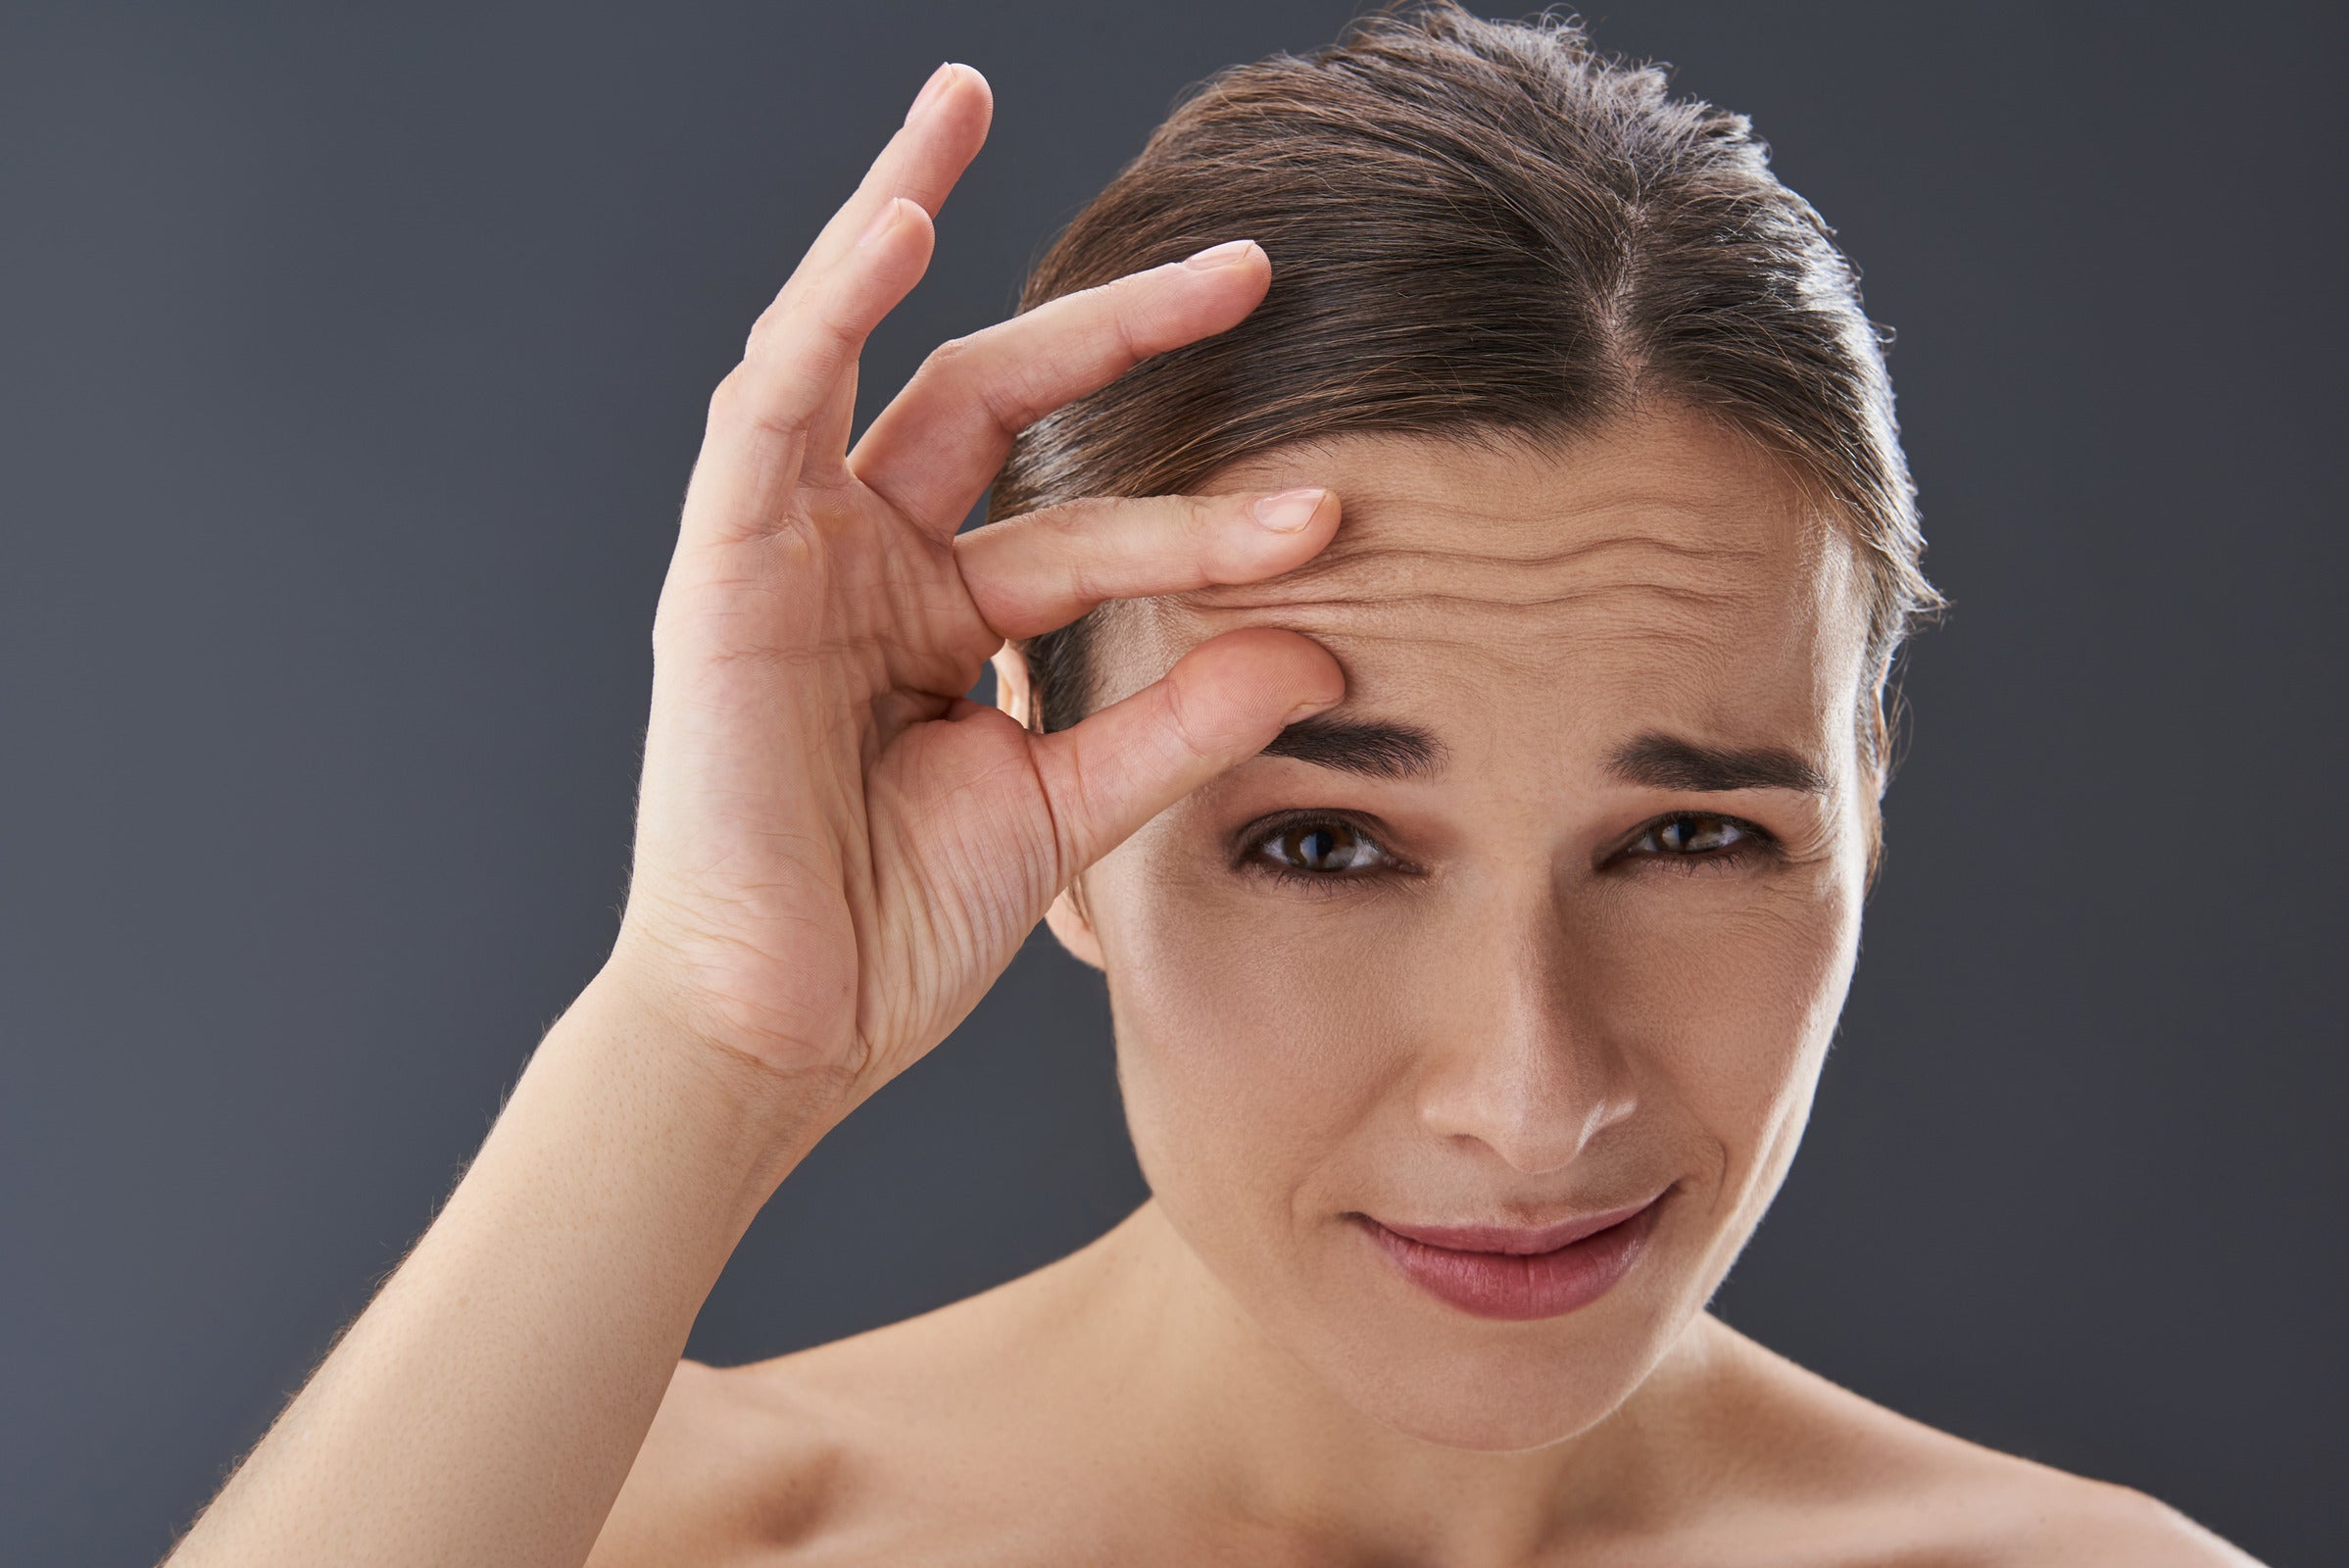 The 12 best ways to tighten forehead wrinkles naturally